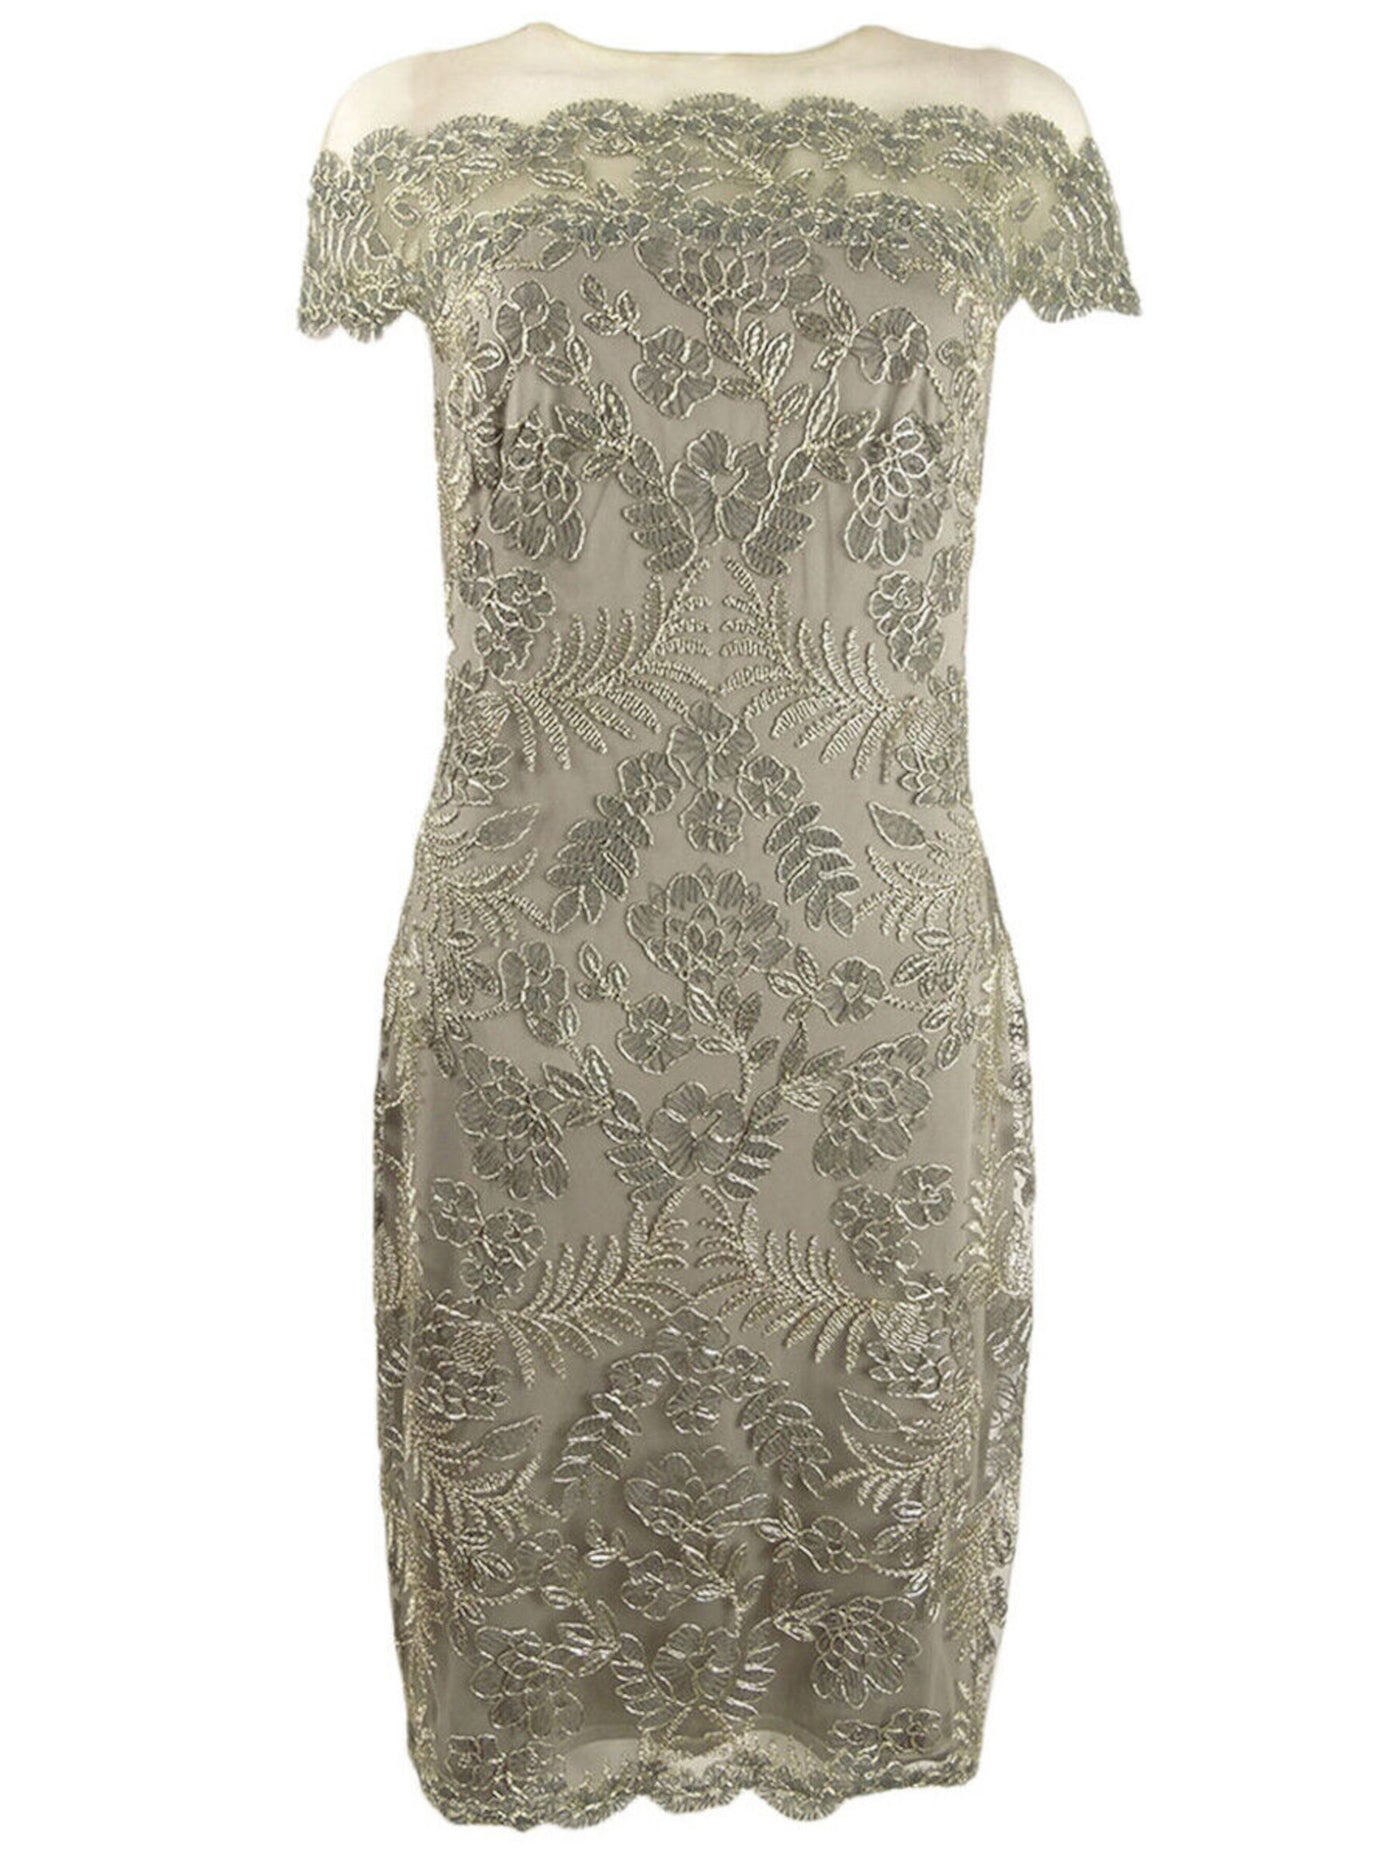 TADASHI SHOJI Womens Gray Embroidered Lace Short Sleeve Off Shoulder Above The Knee Cocktail Body Con Dress 6